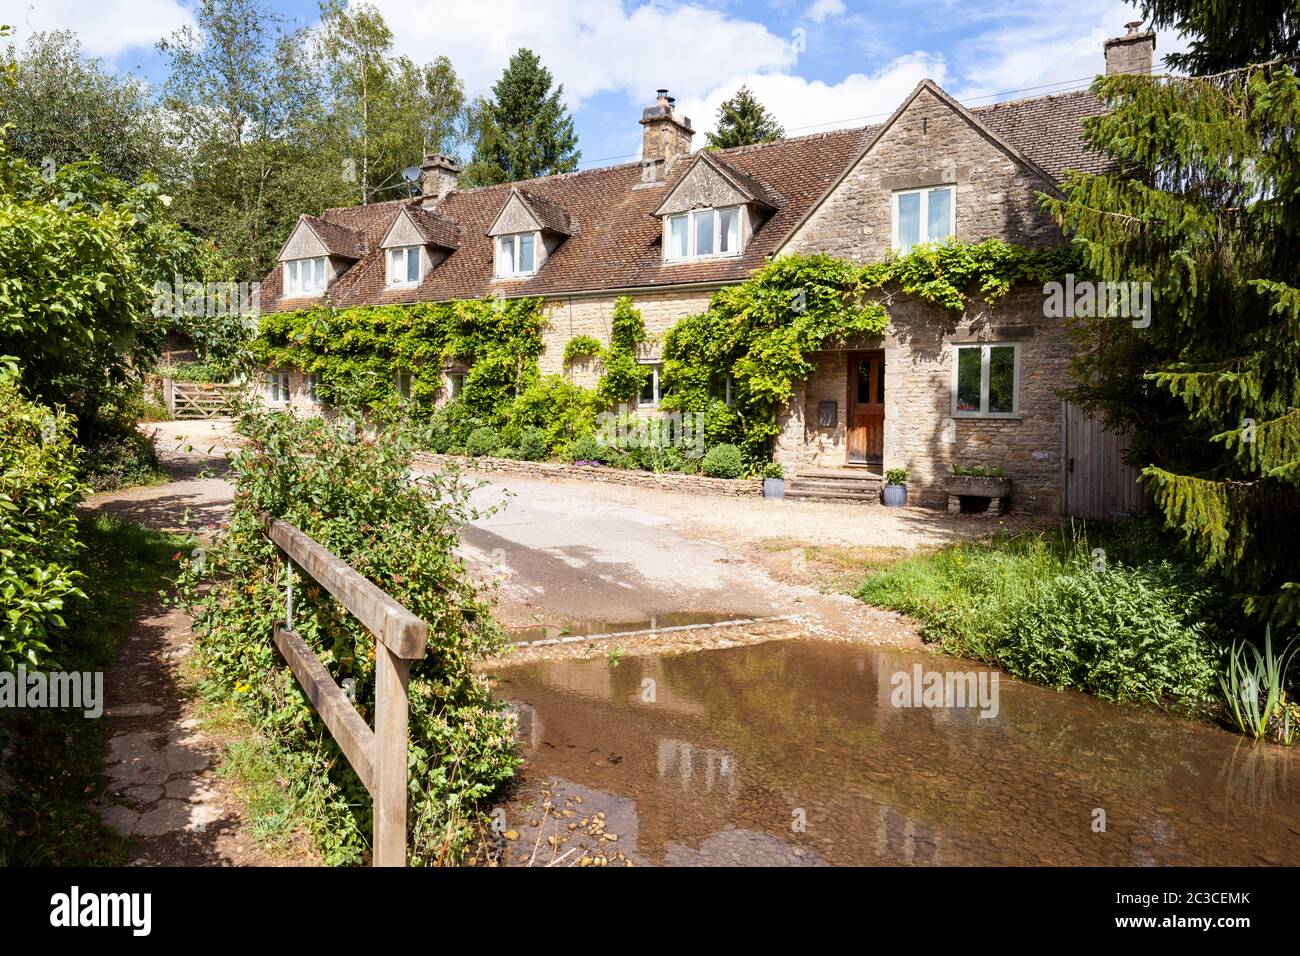 Cottages beside the ford in the Cotswold village of Duntisbourne Rouse, Gloucestershire UK Stock Photo